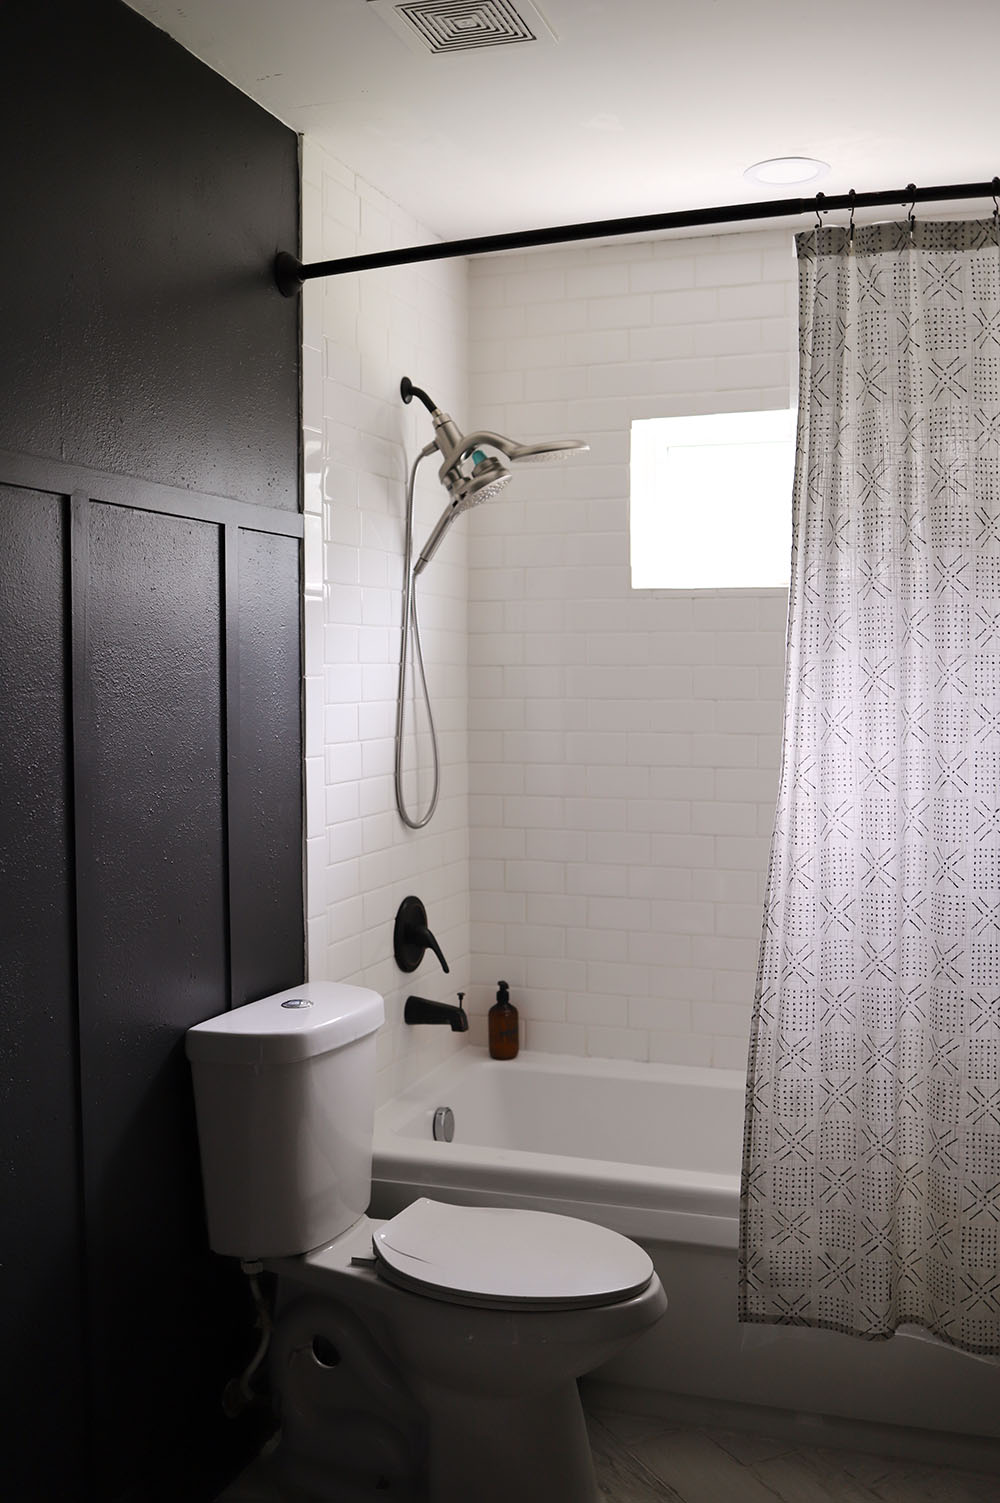 Board and Batten Bathroom Makeover- Dark and Moody Transformation for a small bathroom by top Florida lifestyle blogger Tabitha Blue of Fresh Mommy Blog